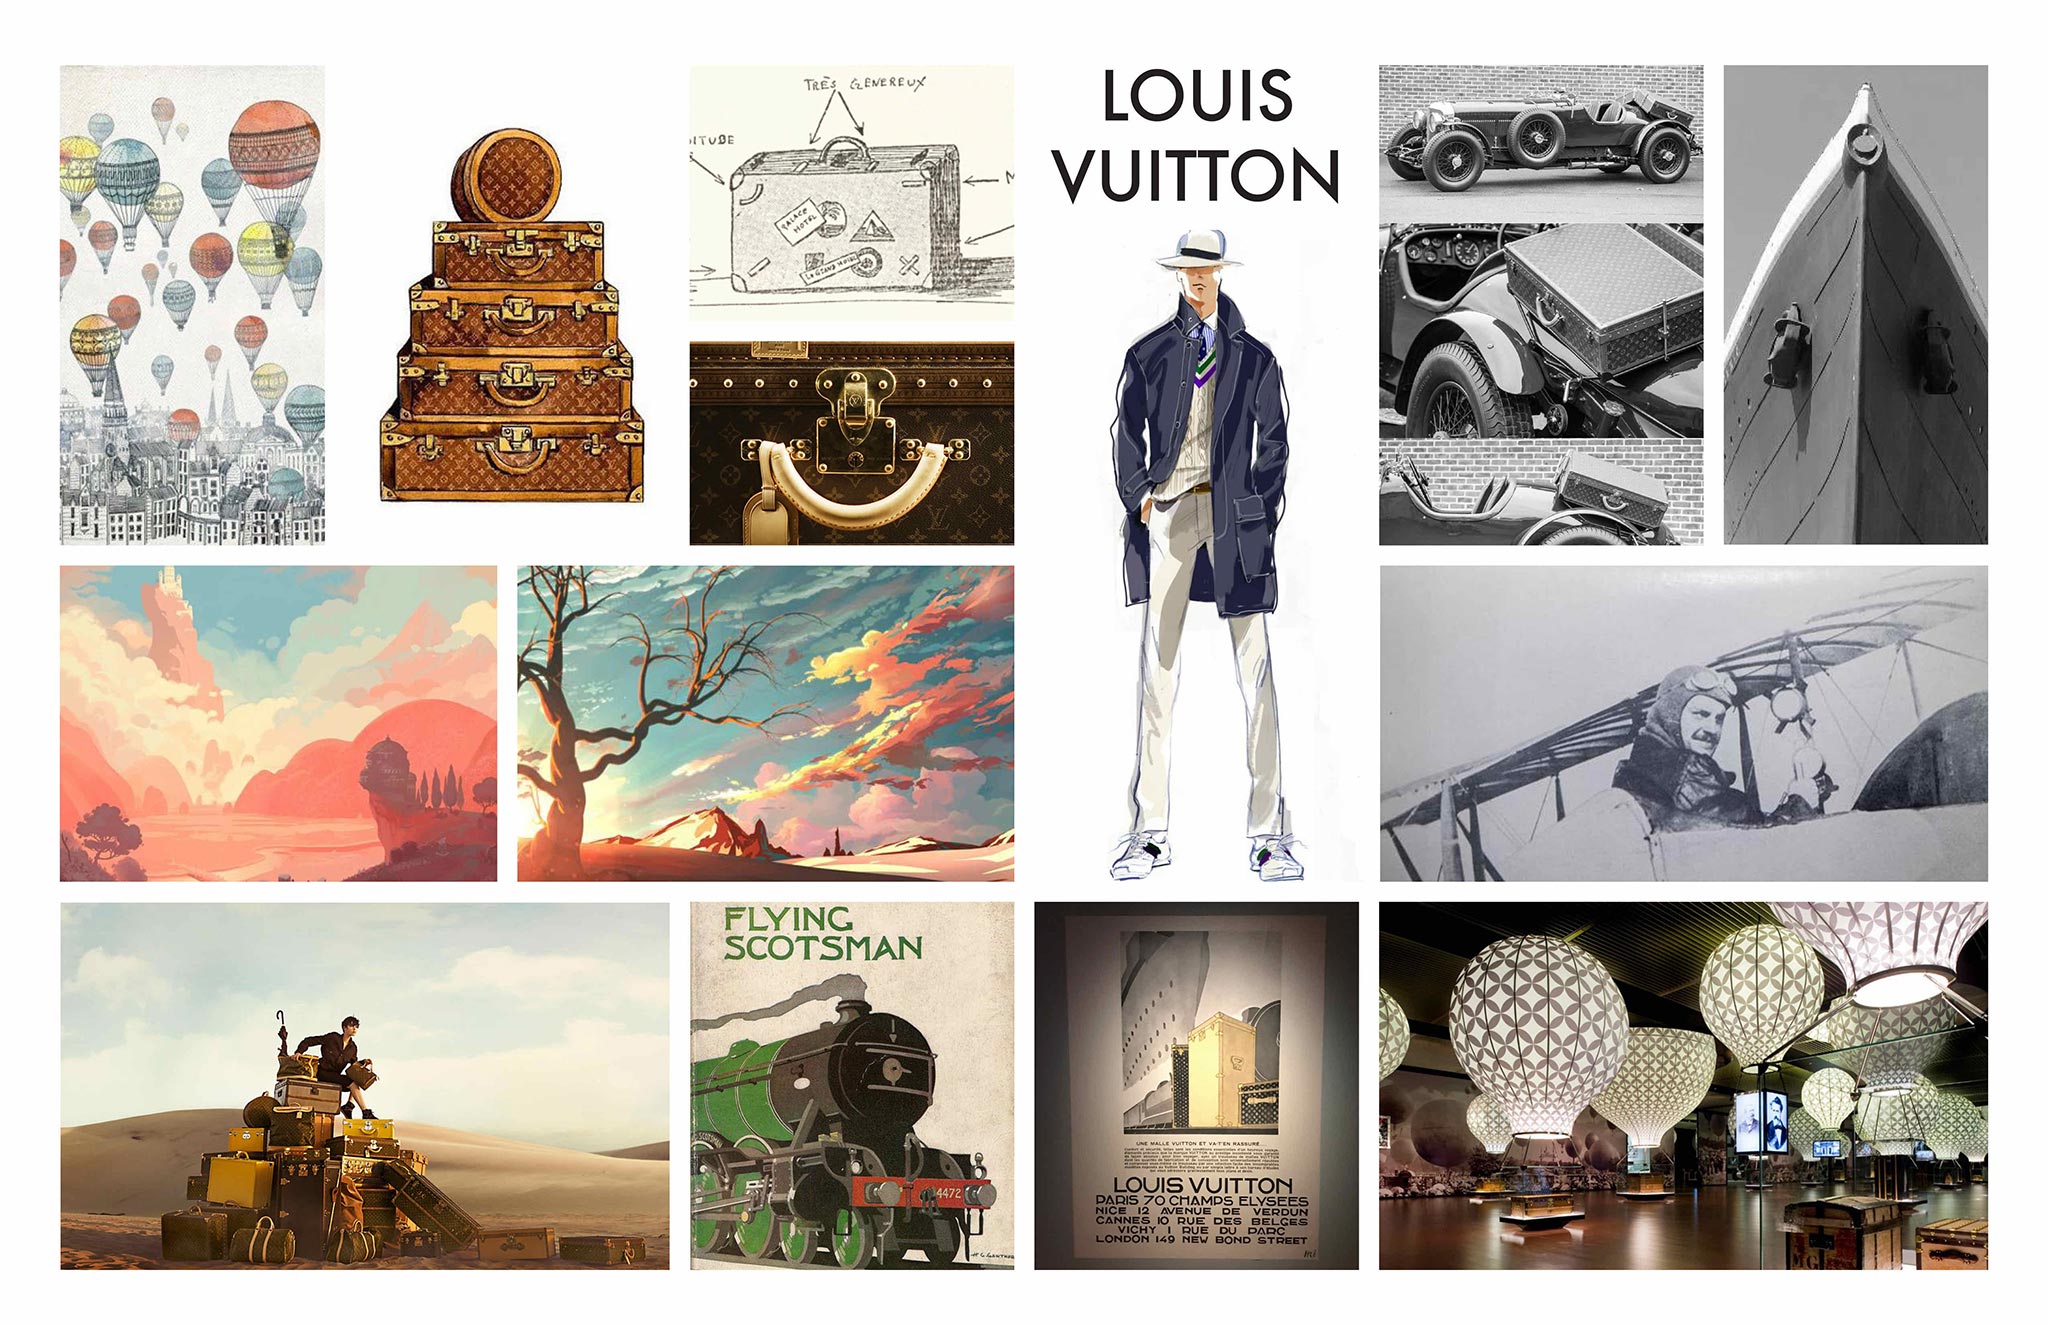 Louis Vuitton The Art of the Journey arrives at Bond Street